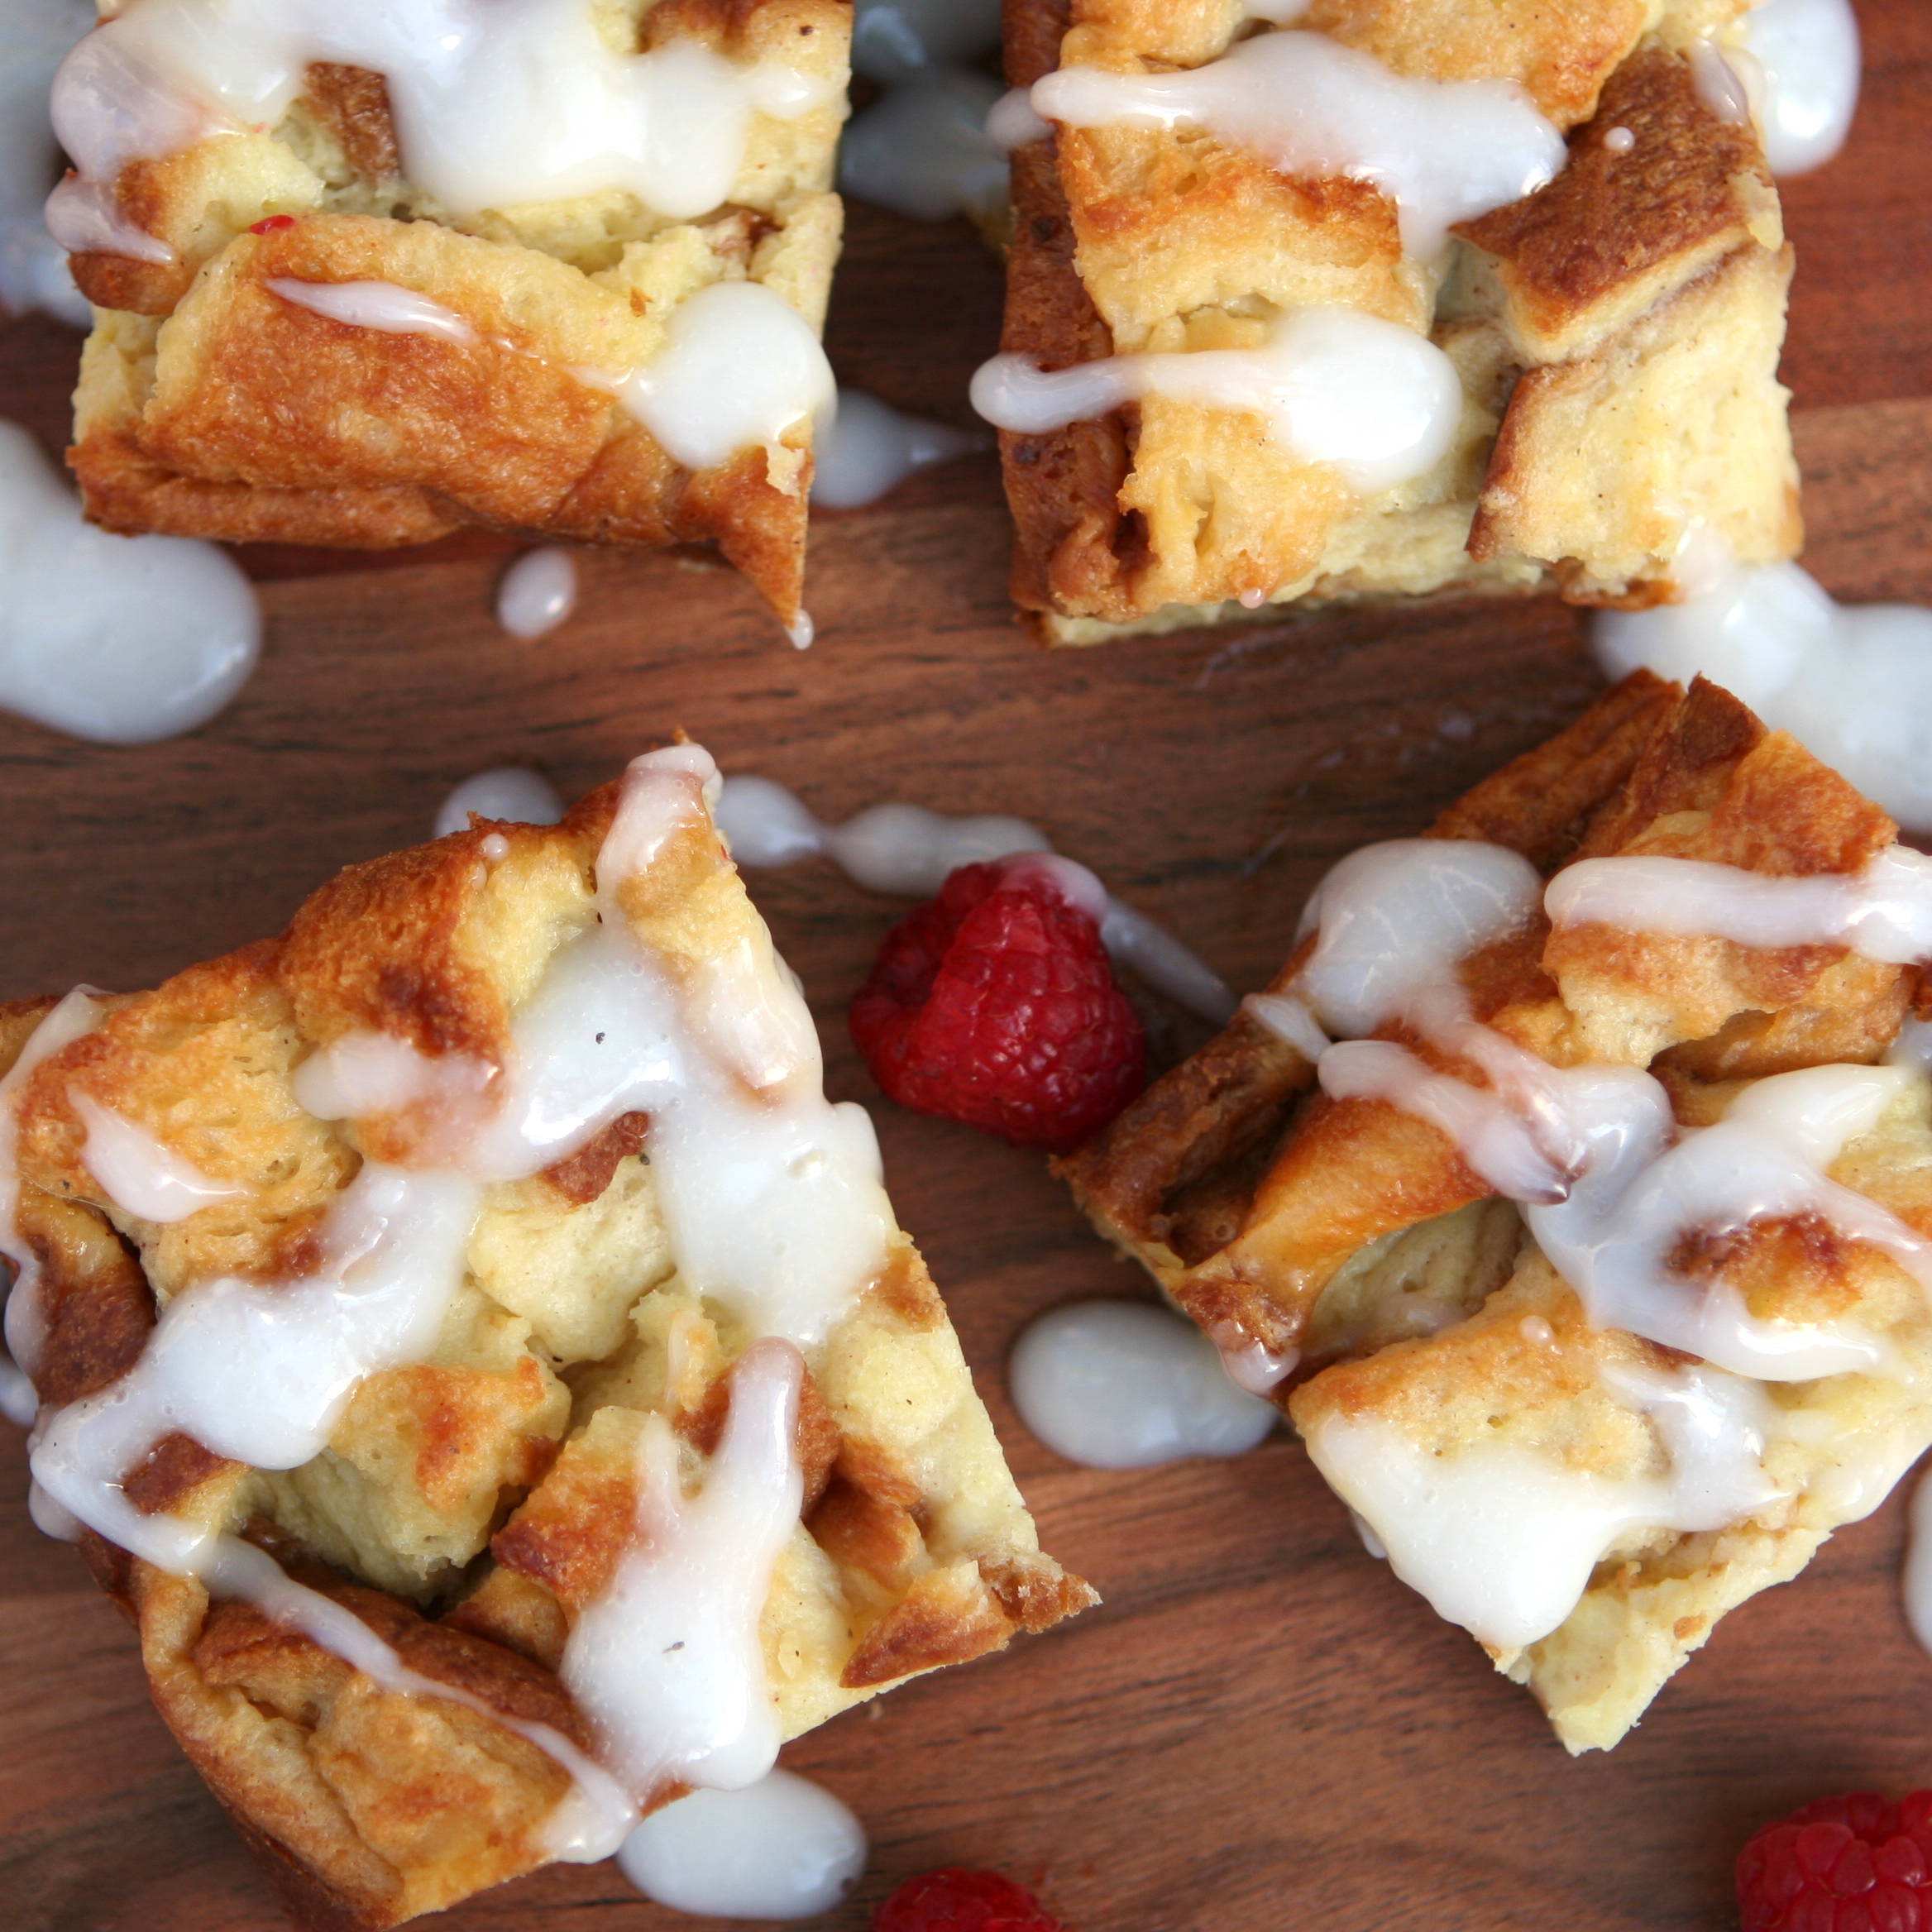 CREAMY COCONUT BREAD PUDDING WITH BERRIES AND COCONUT SYRUP DRIZZLE